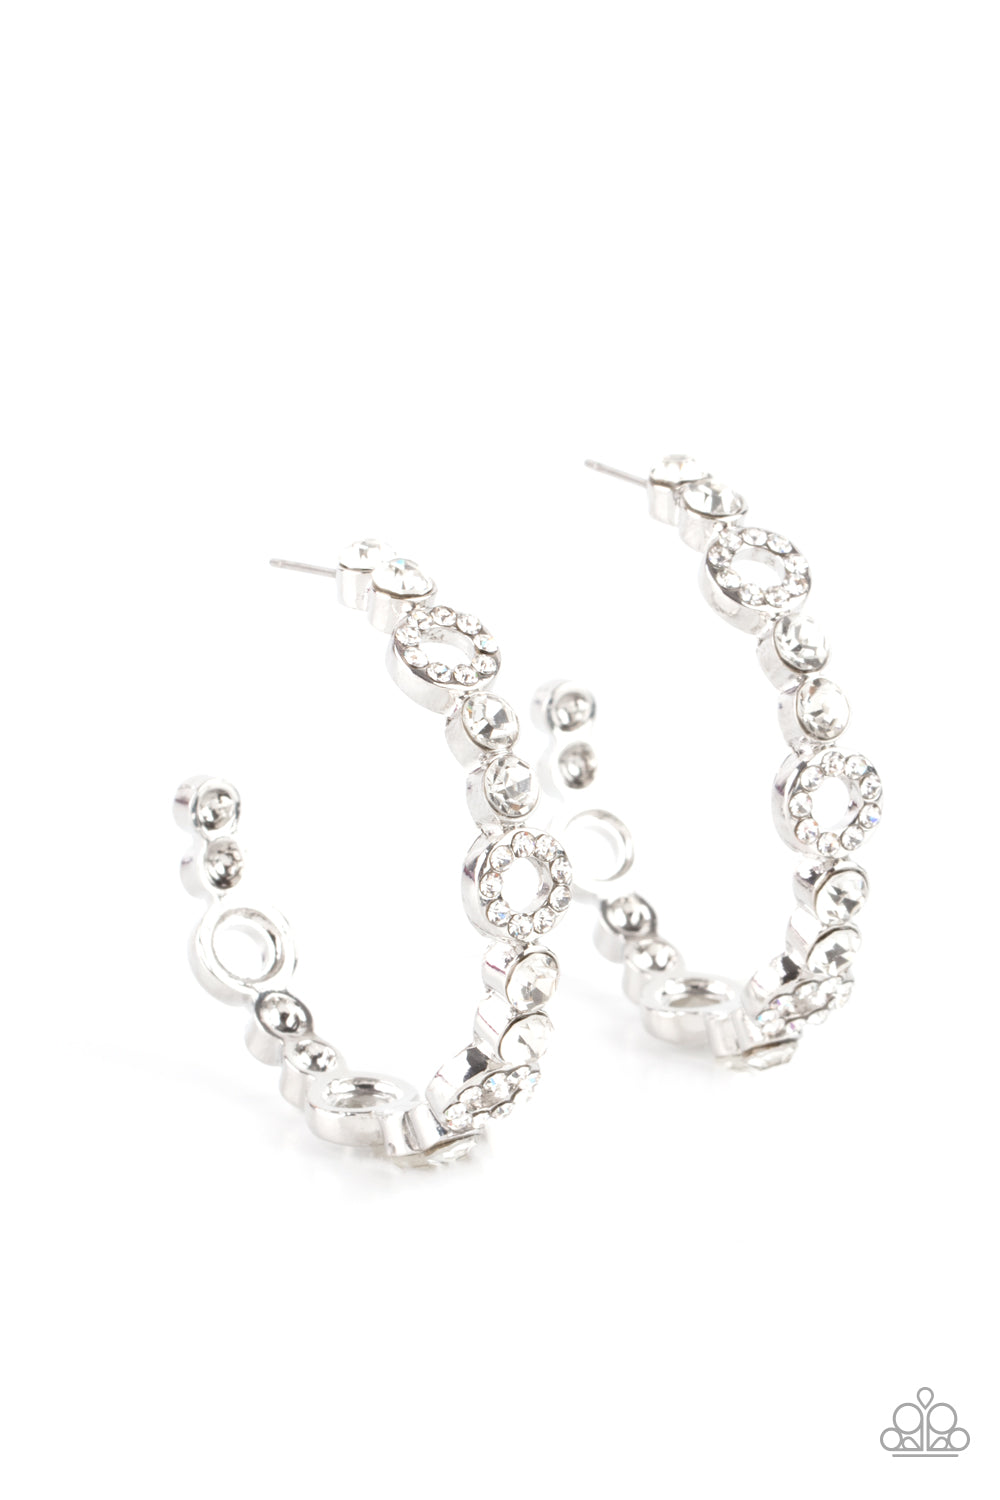 Swoon-Worthy Sparkle - White and Silver Hoop Earrings - Paparazzi Accessories - Dainty round silver frames encrusted with sparkling white rhinestones act as show-stopping accents around a silver hoop of white rhinestones culminating in a swoon-worthy finish. Earring attaches to a standard post fitting. Hoop measures approximately 1 1/2" in diameter. Sold as one pair of hoop earrings.